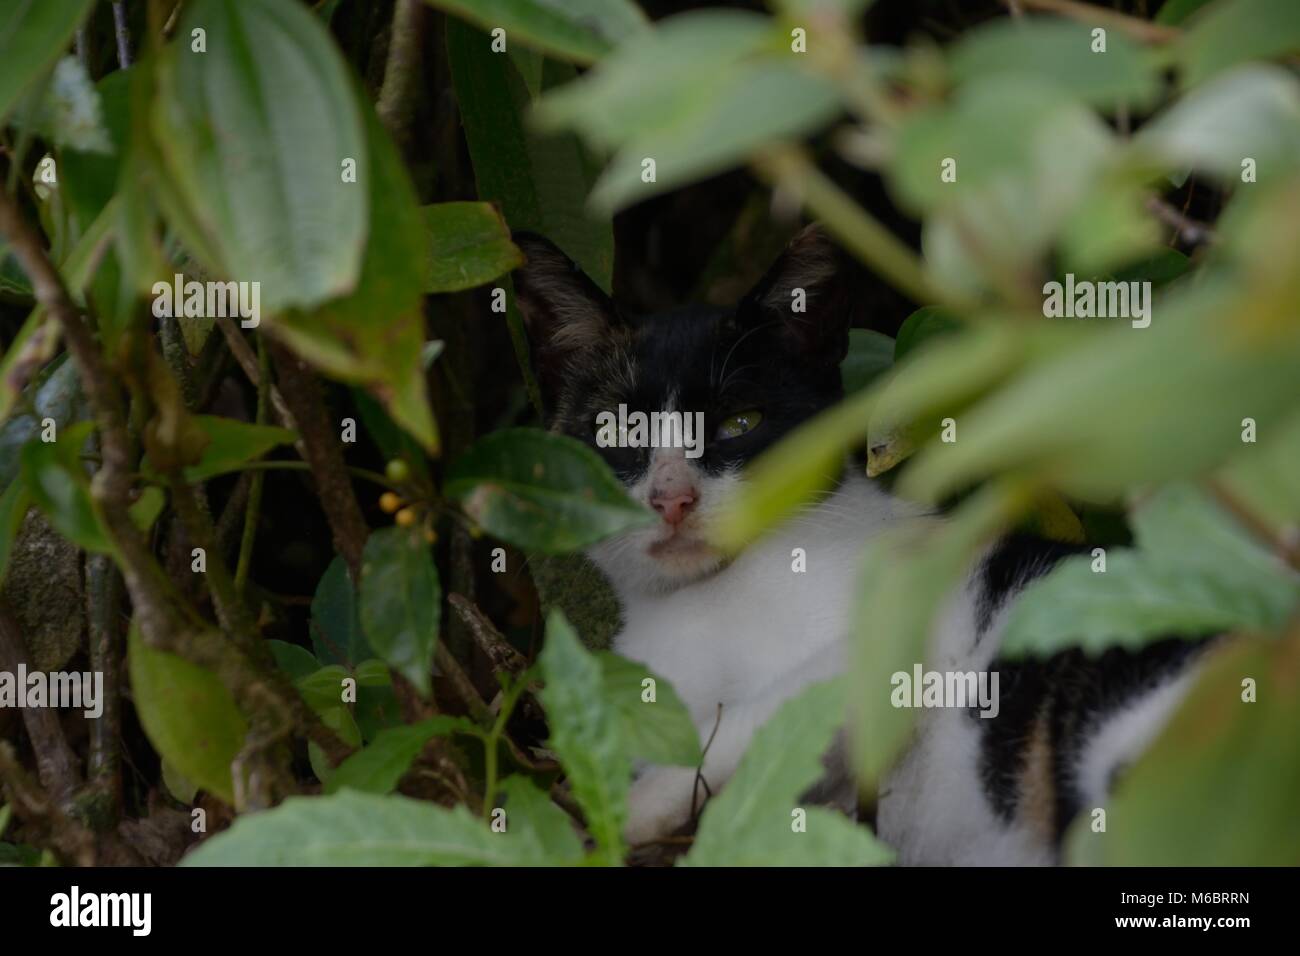 Wild cat hiding in shadow in the middle of a shrub with its bright green eyes gazing sharply in between the leaves. Stock Photo